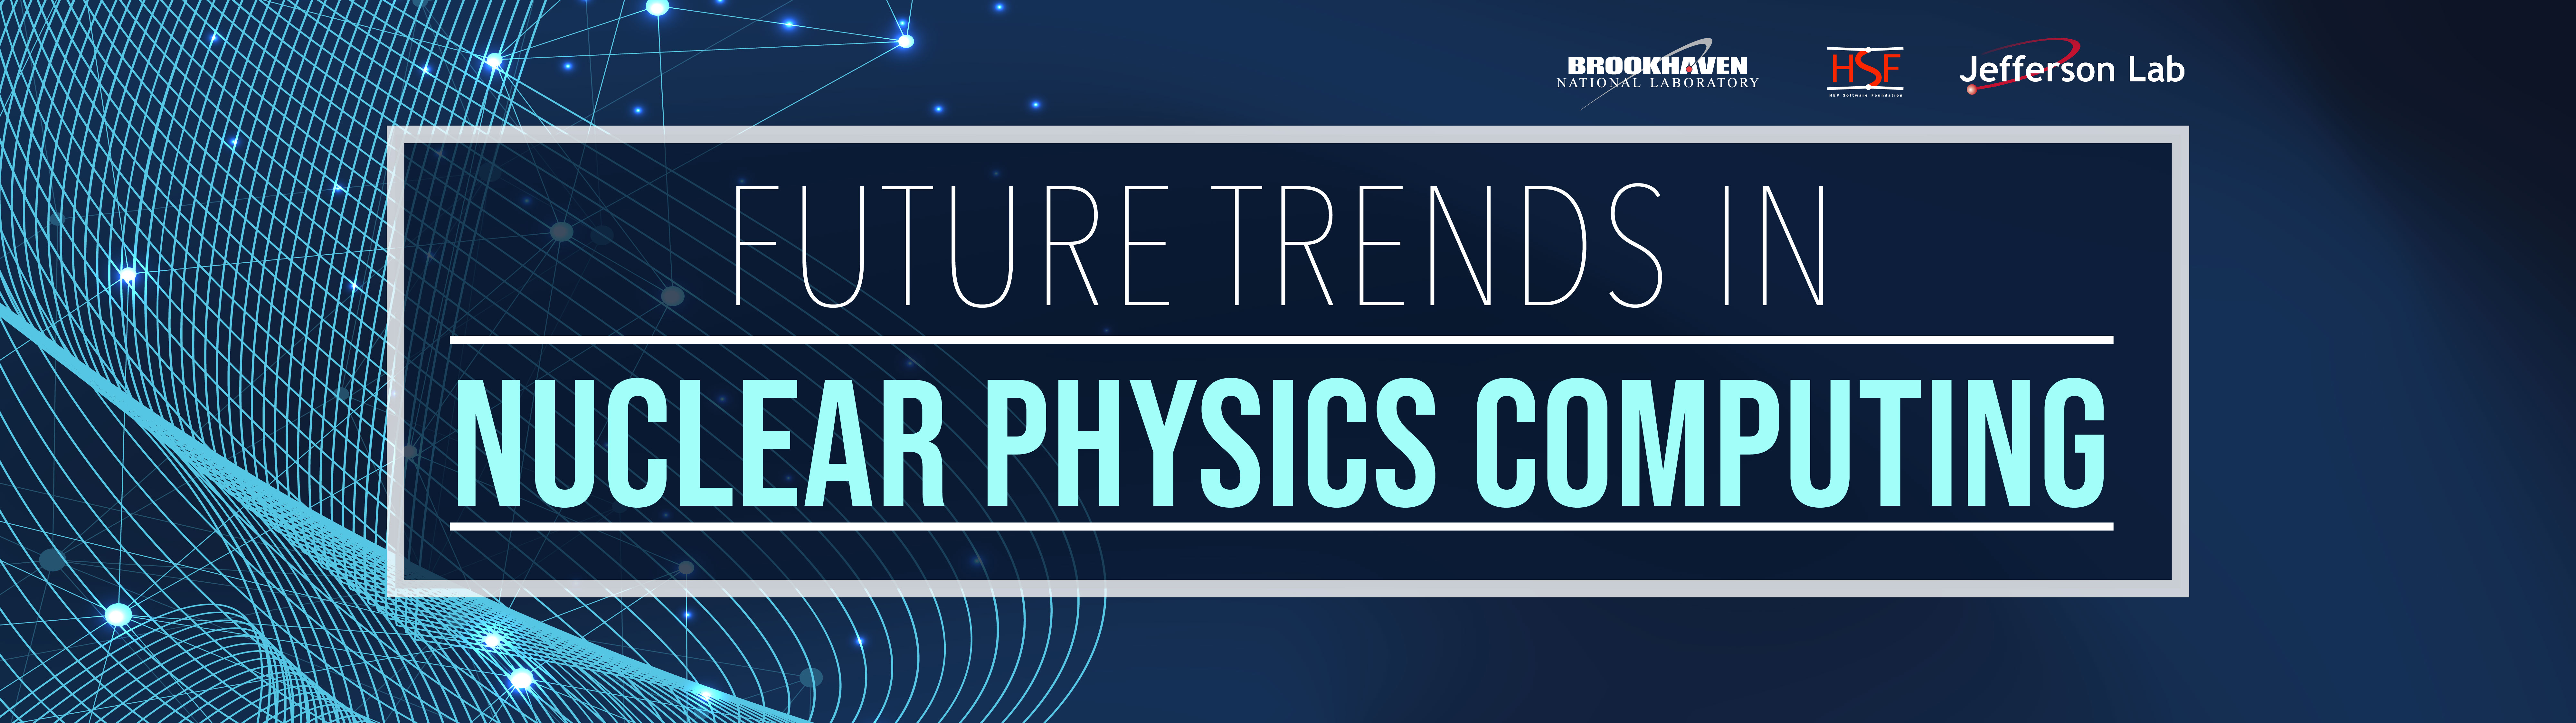 Web Banner for Future Trends in Nuclear Physics Computing